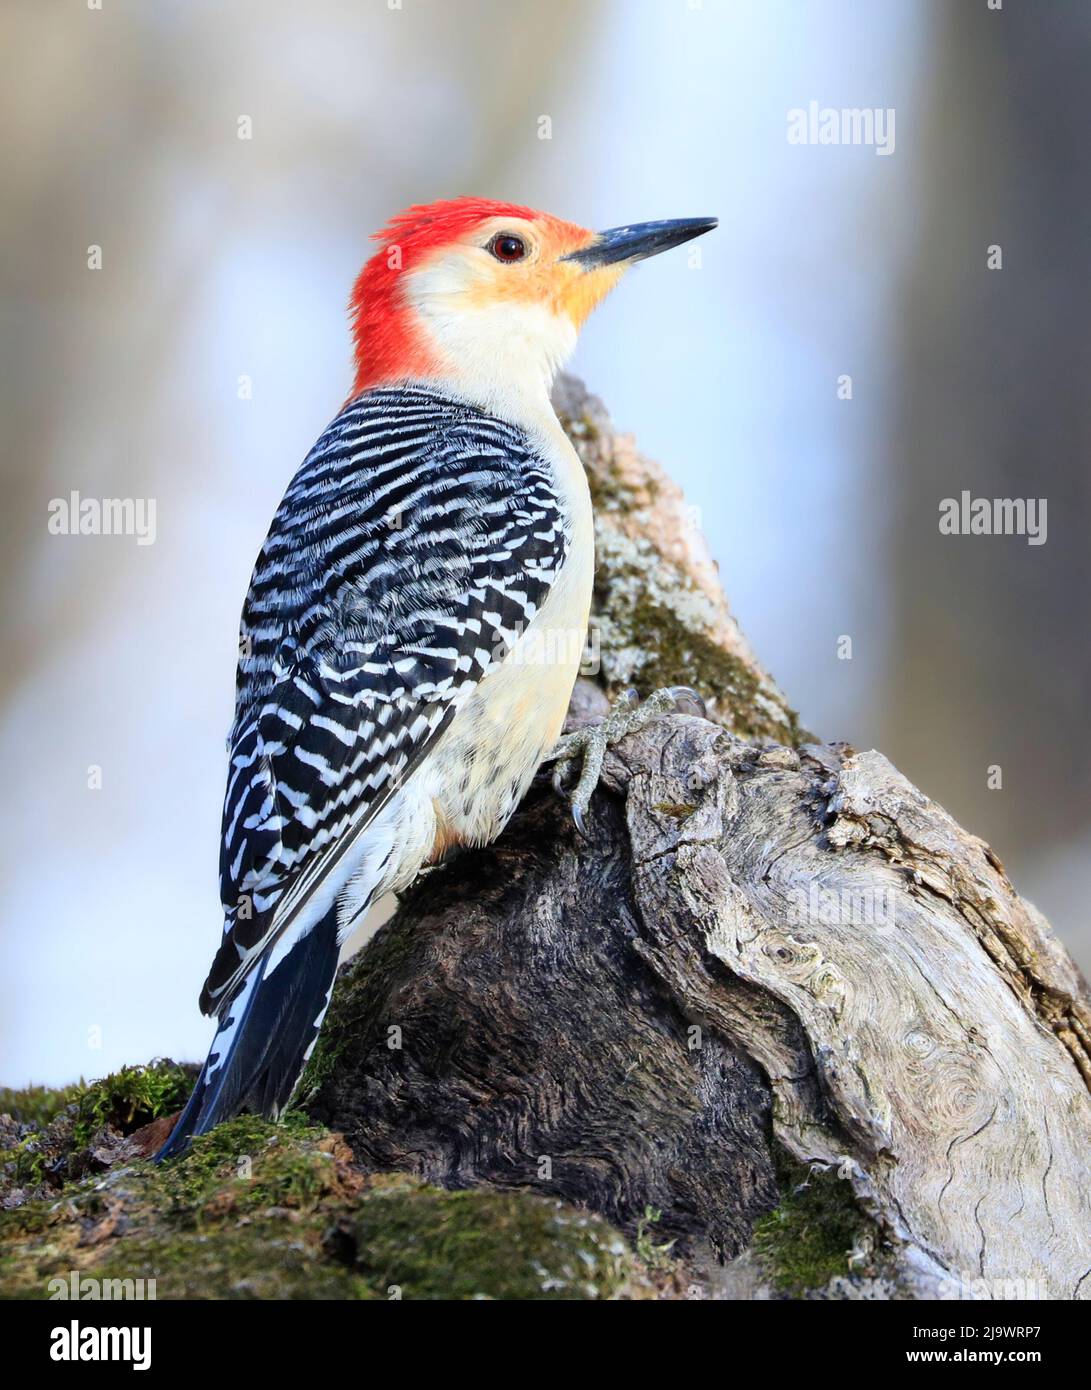 Red-bellied woodpecker sitting on a tree trunk into the forest, Quebec, Canada Stock Photo